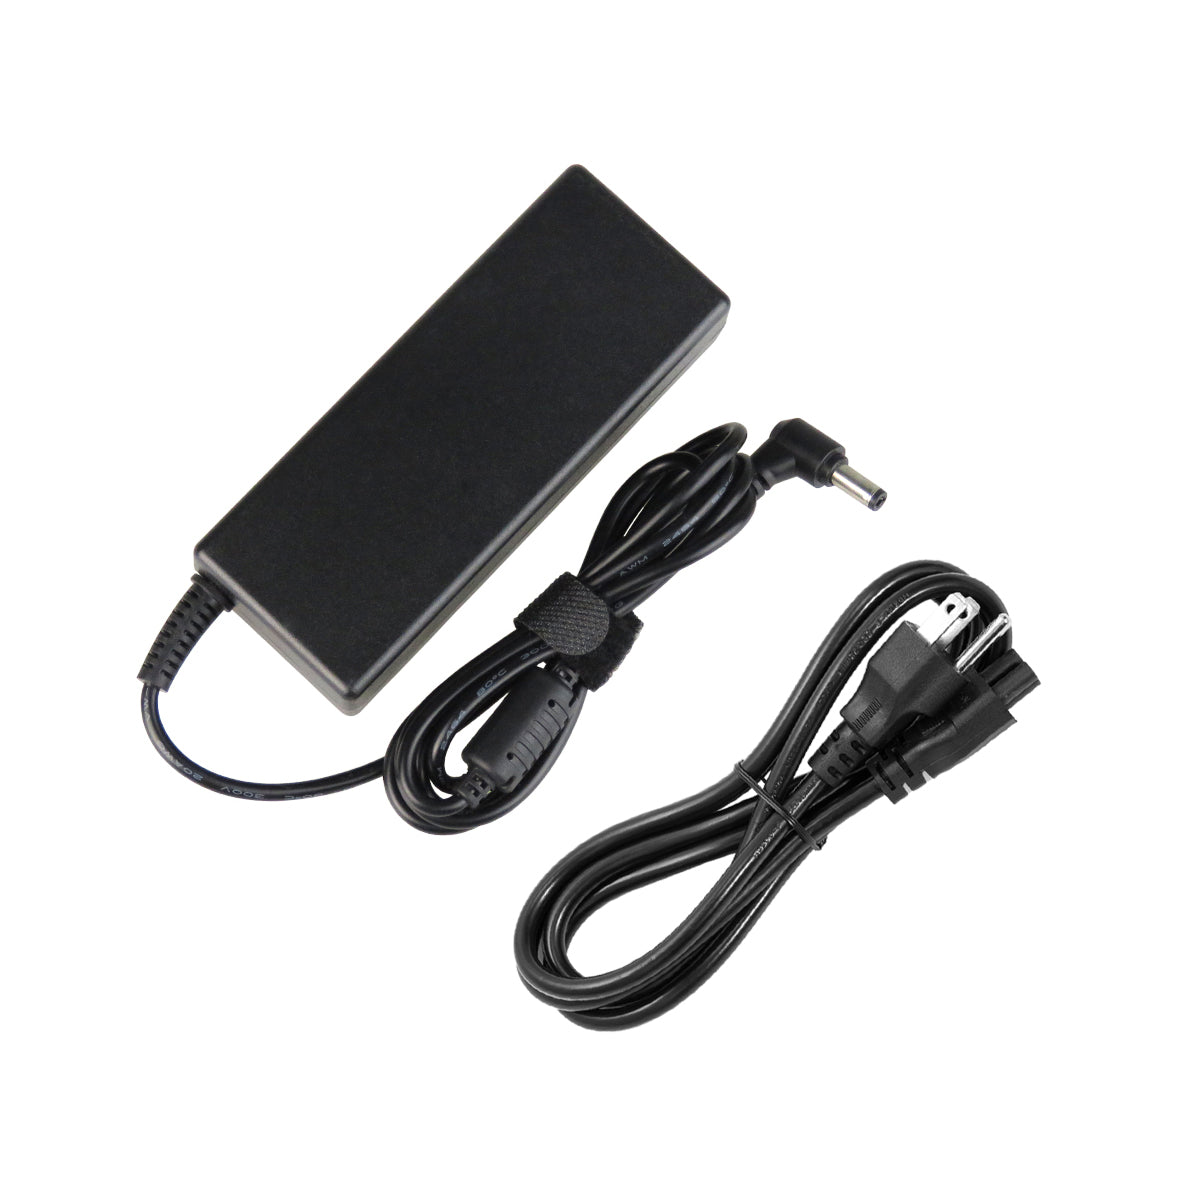 AC Adapter Charger for Gateway M-63 Notebook.